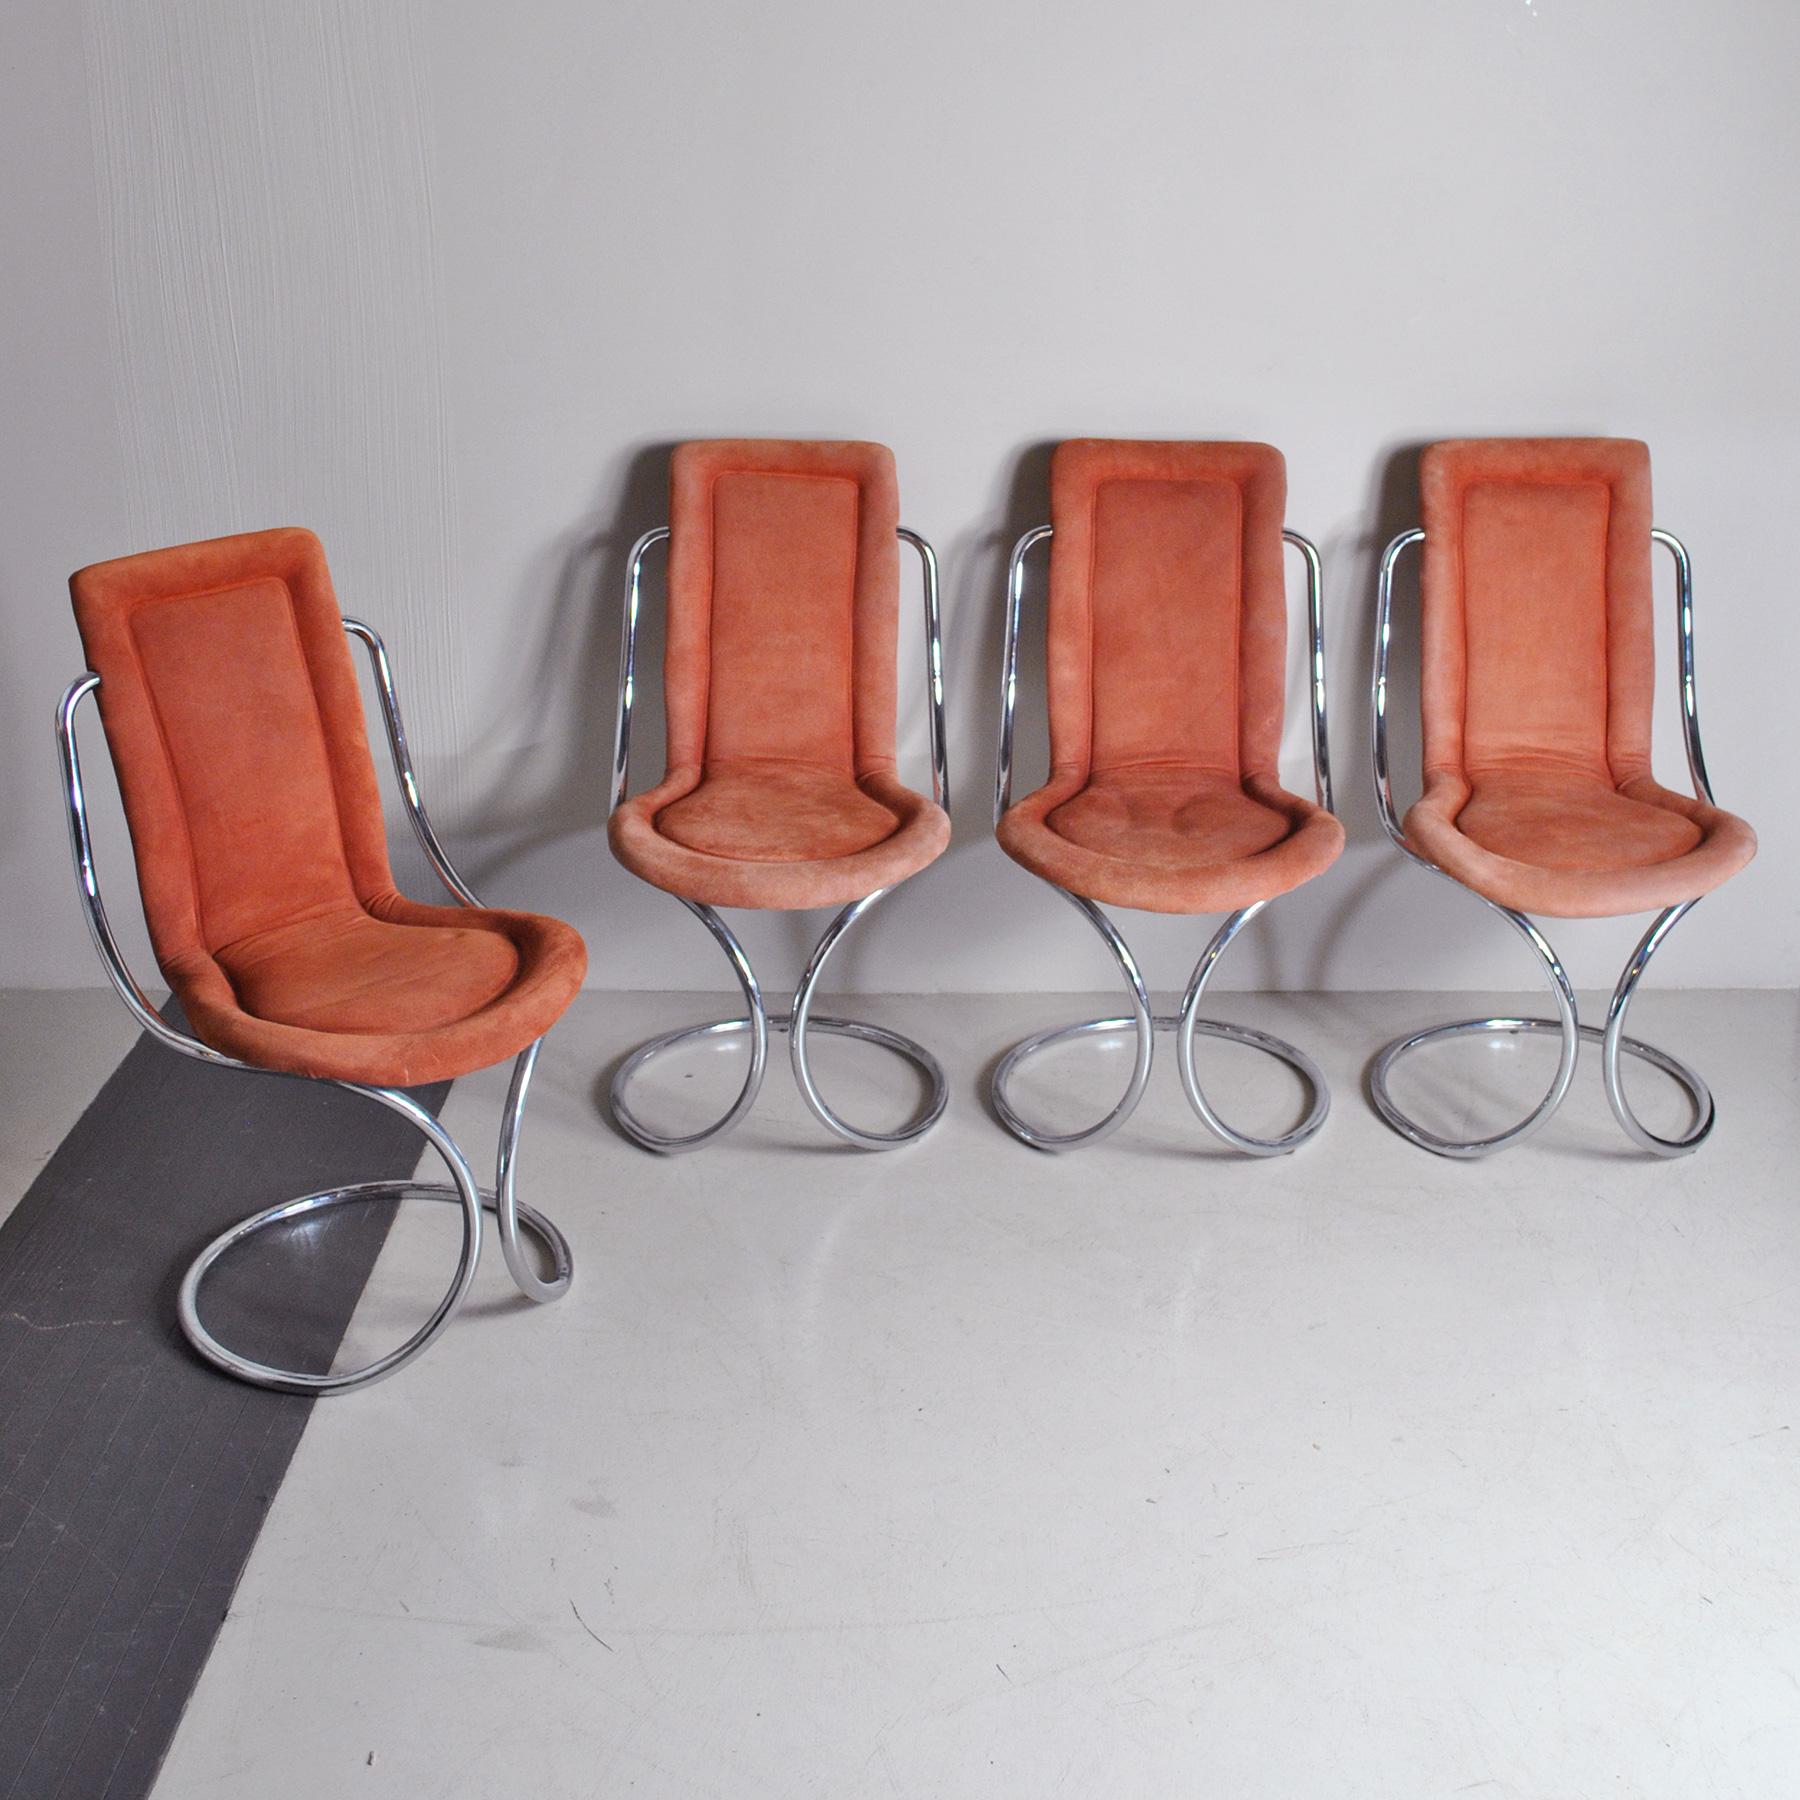 Set of four chairs by Tecnosalotto form the seventies in chromed steel and alcantara leather.